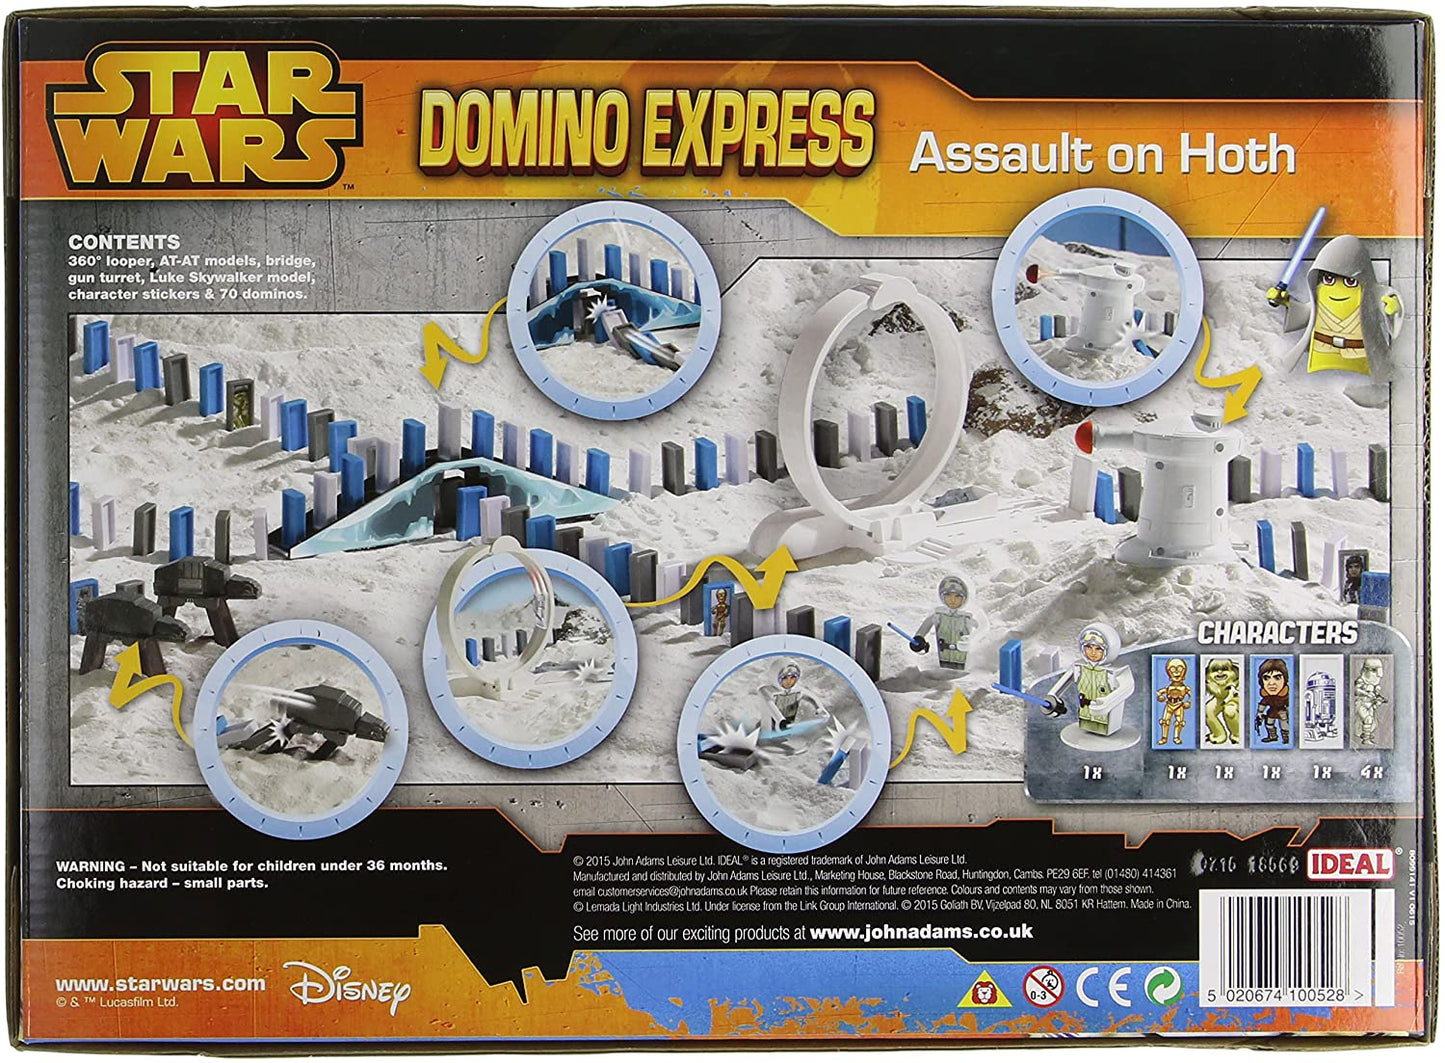 Star Wars Assault on Hoth Domino Game, 70 pieces